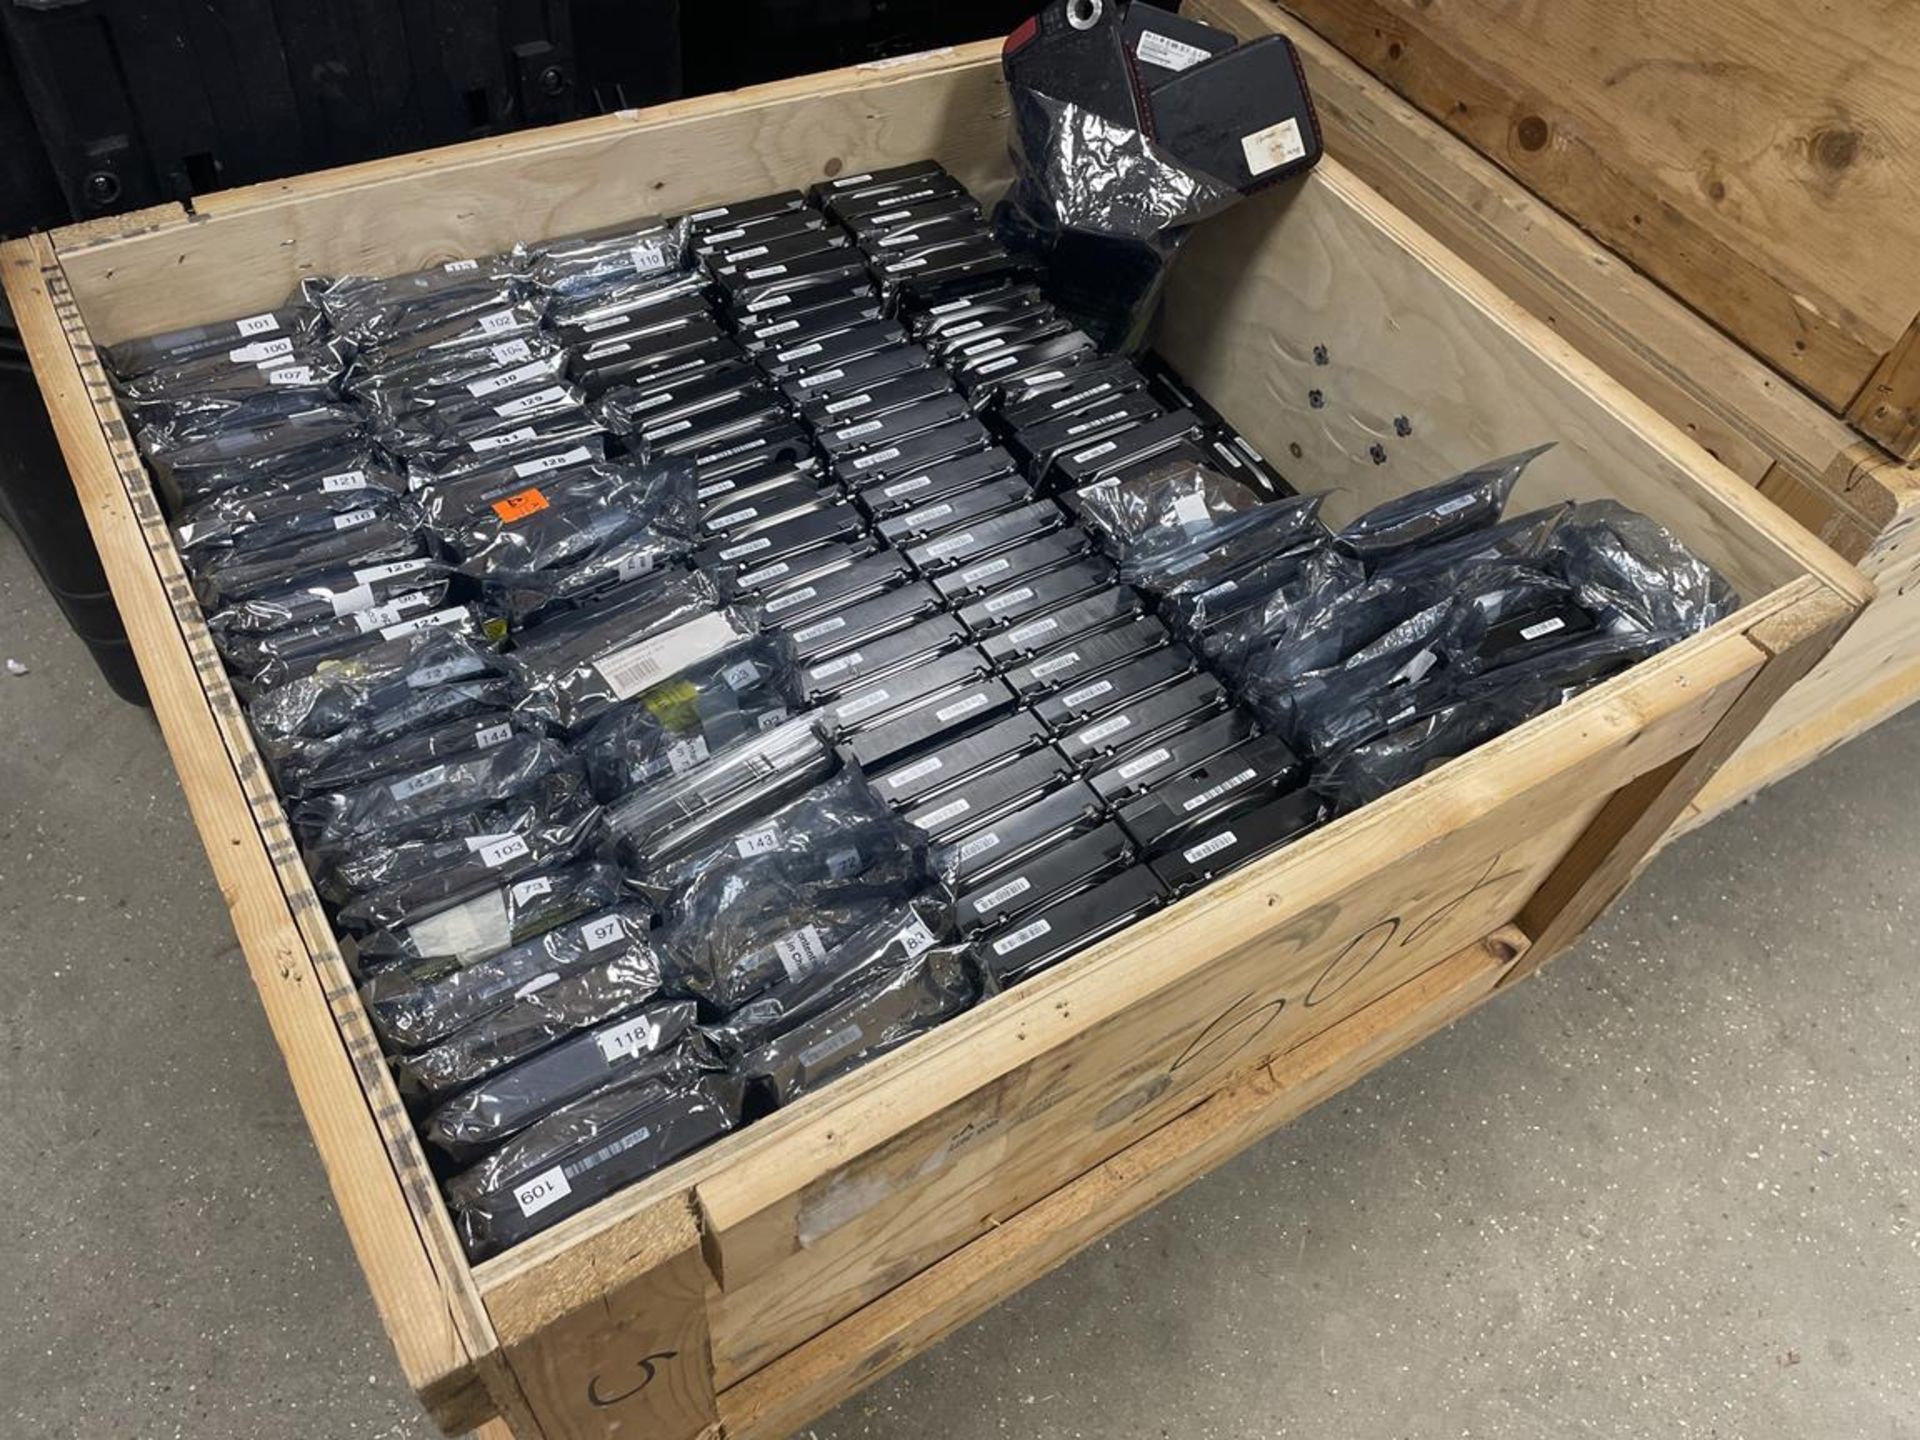 20x 3TB Hard Drives, Mainly Seagate (photos are a representative example only) - Bild 2 aus 2